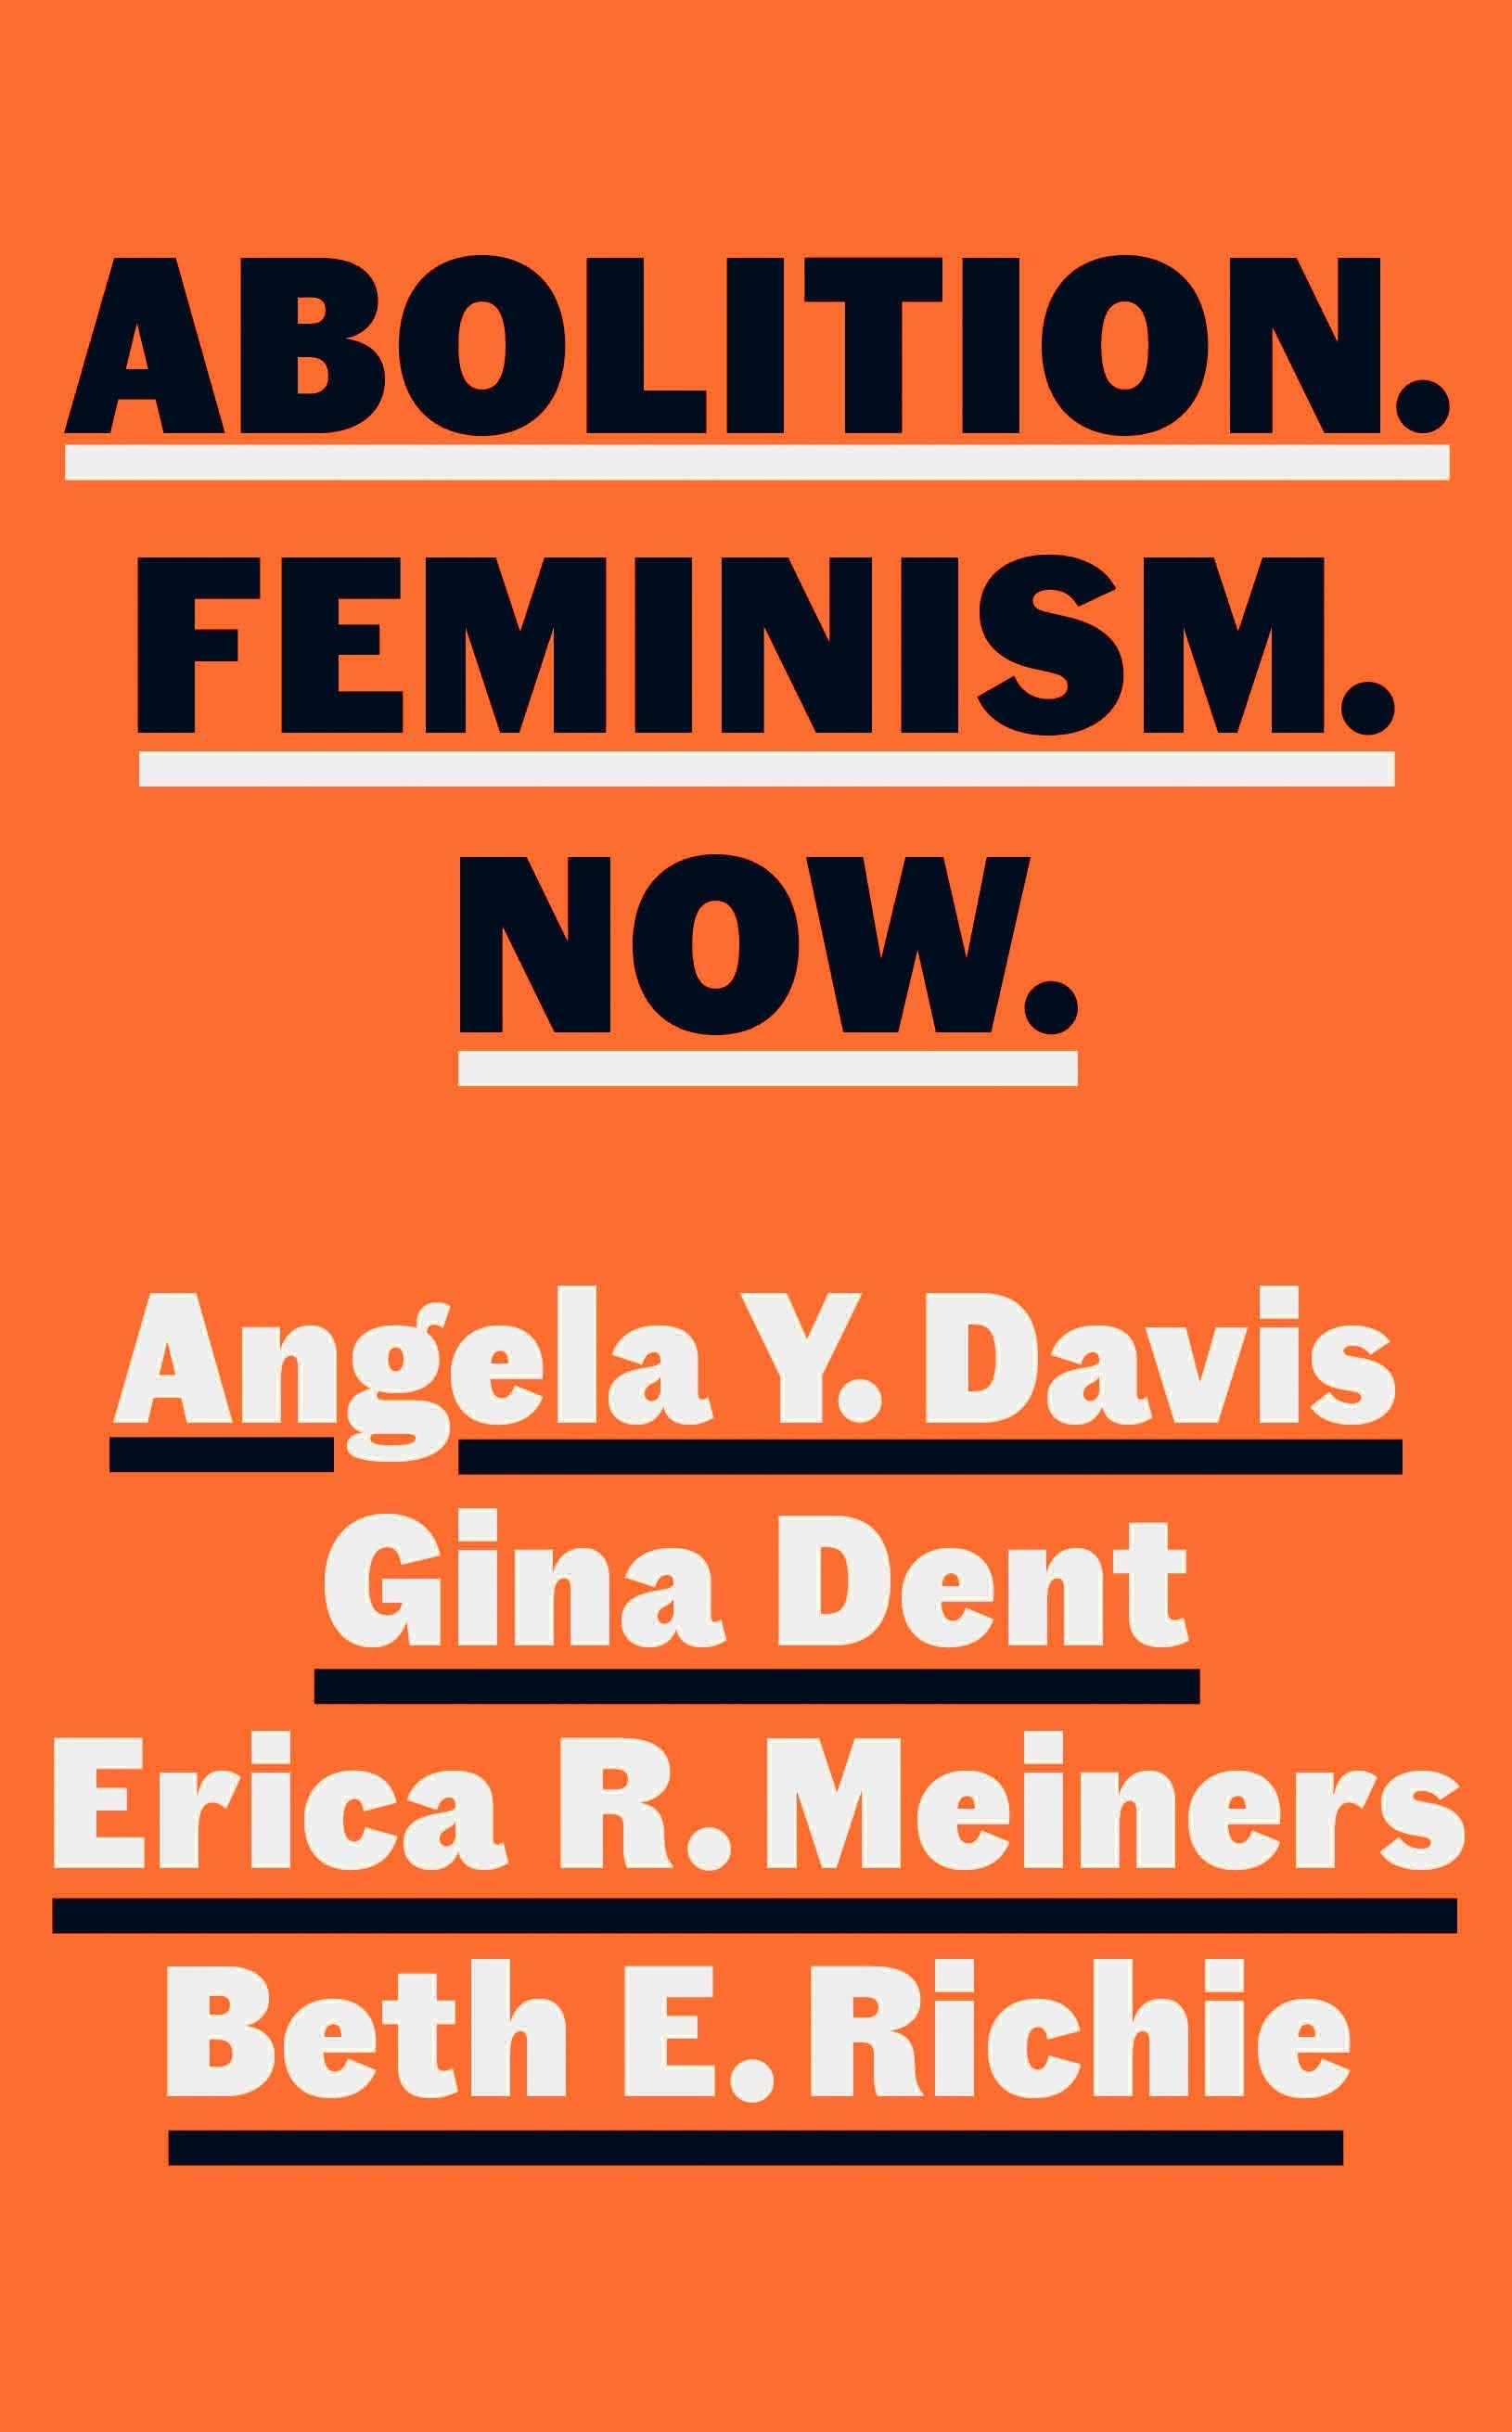 Book “Abolition. Feminism. Now.” by Angela Y. Davis — January 13, 2022